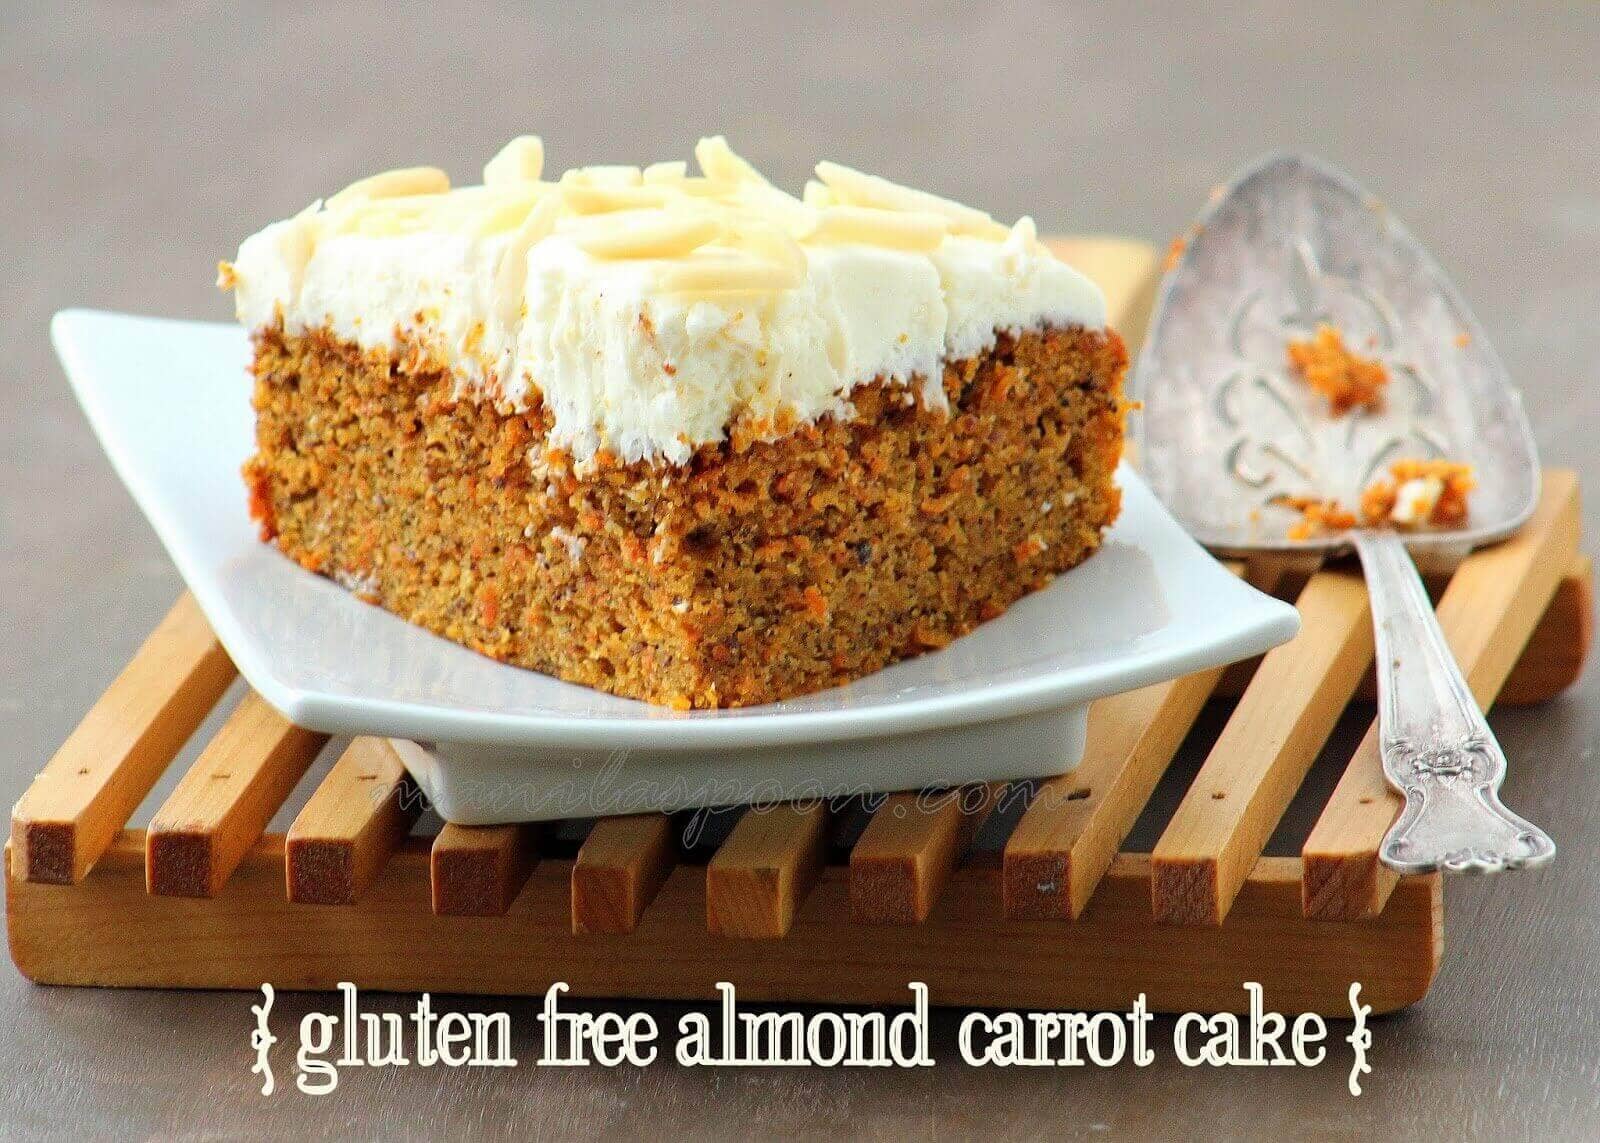 Almond Carrot Cake with Lemon Cream Cheese Frosting (Gluten-free)